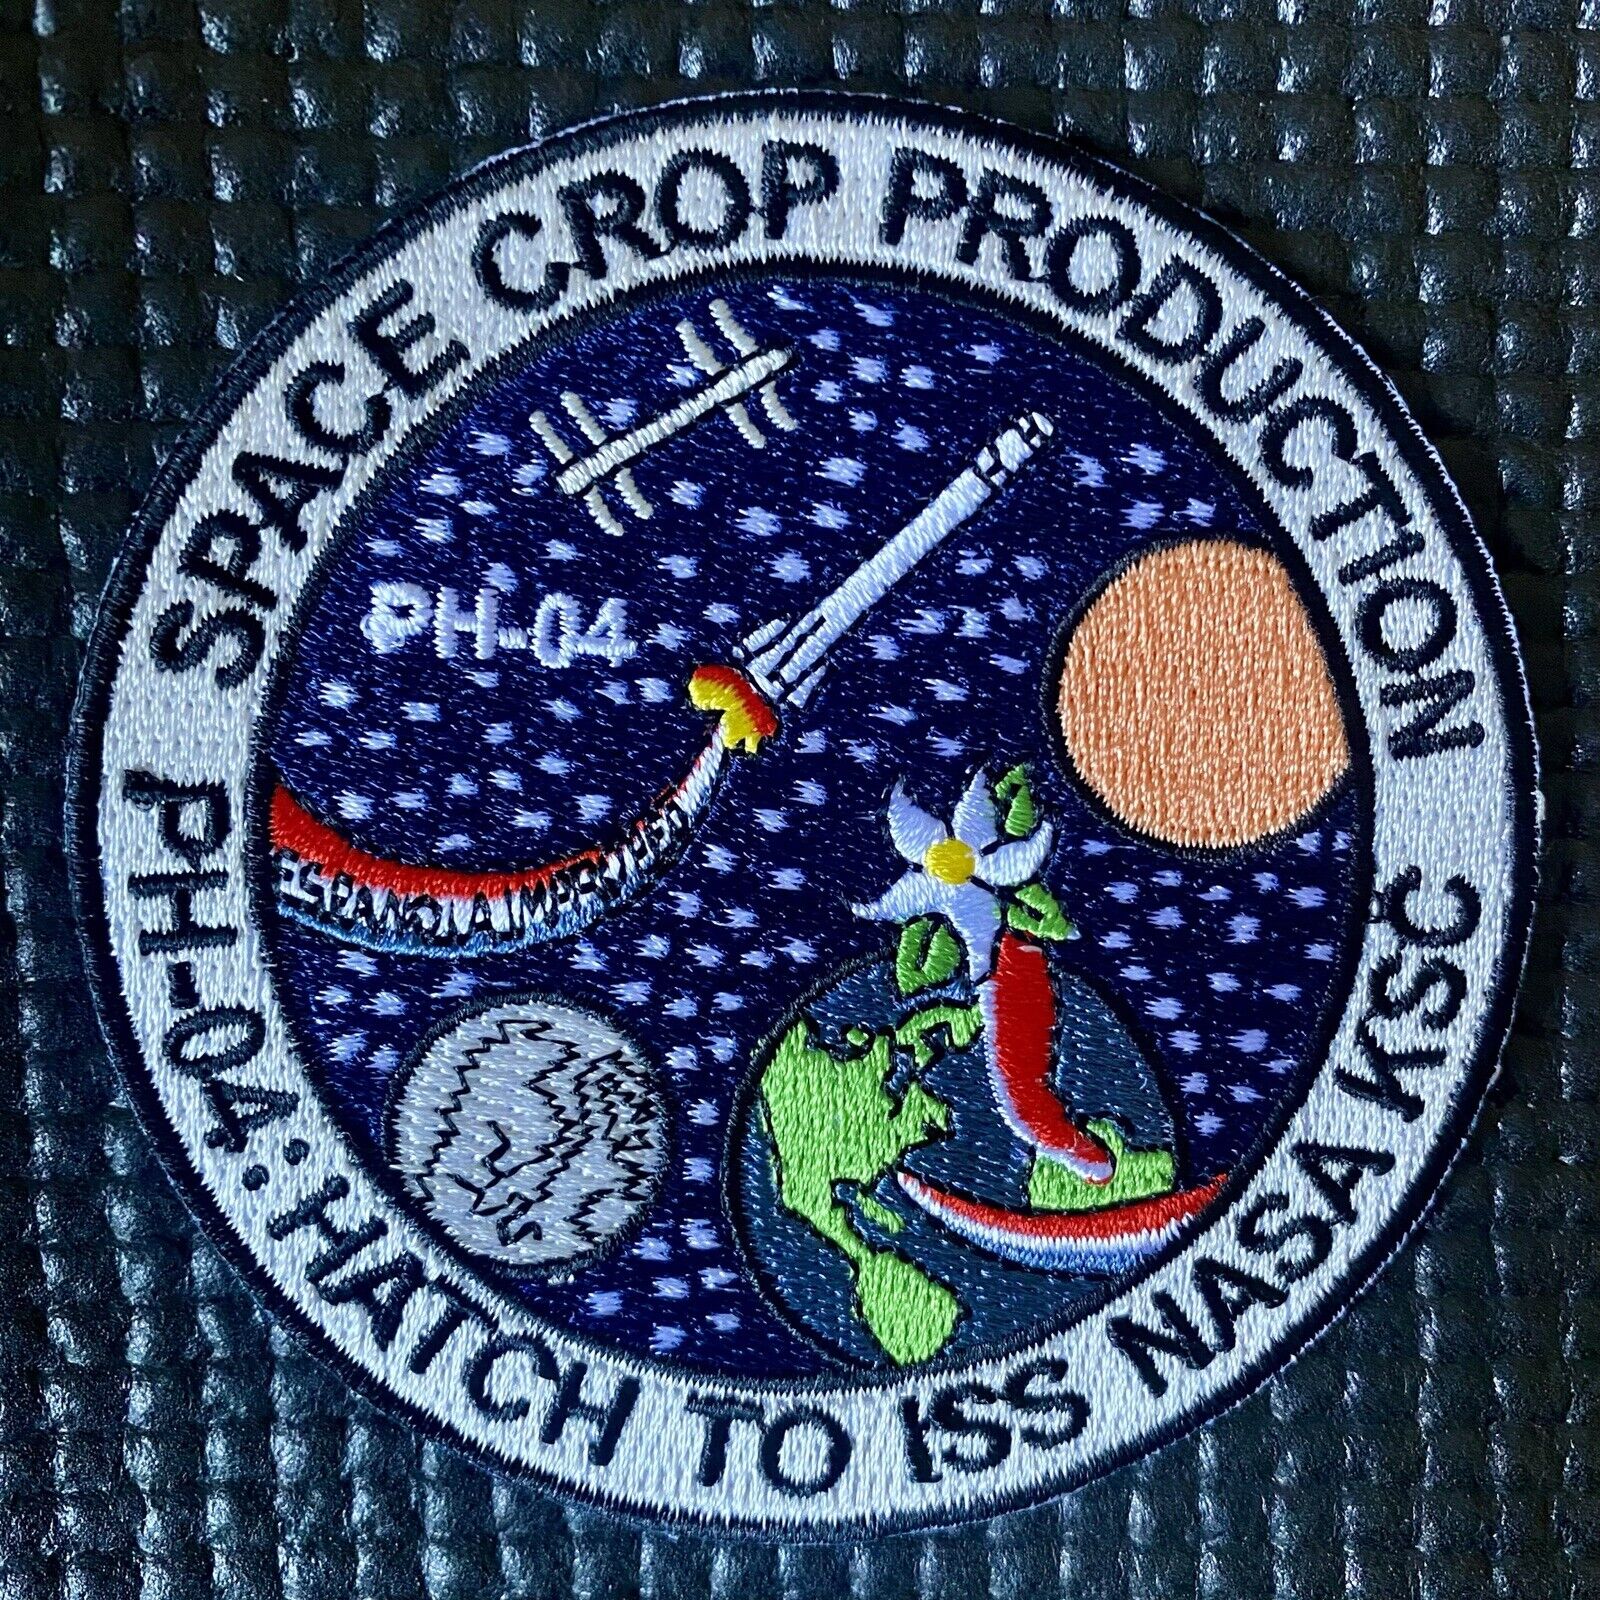 NASA - PLANT HABITAT 04 ISS MISSION PATCH - KENNEDY SPACE CENTER KSC - 3.5”